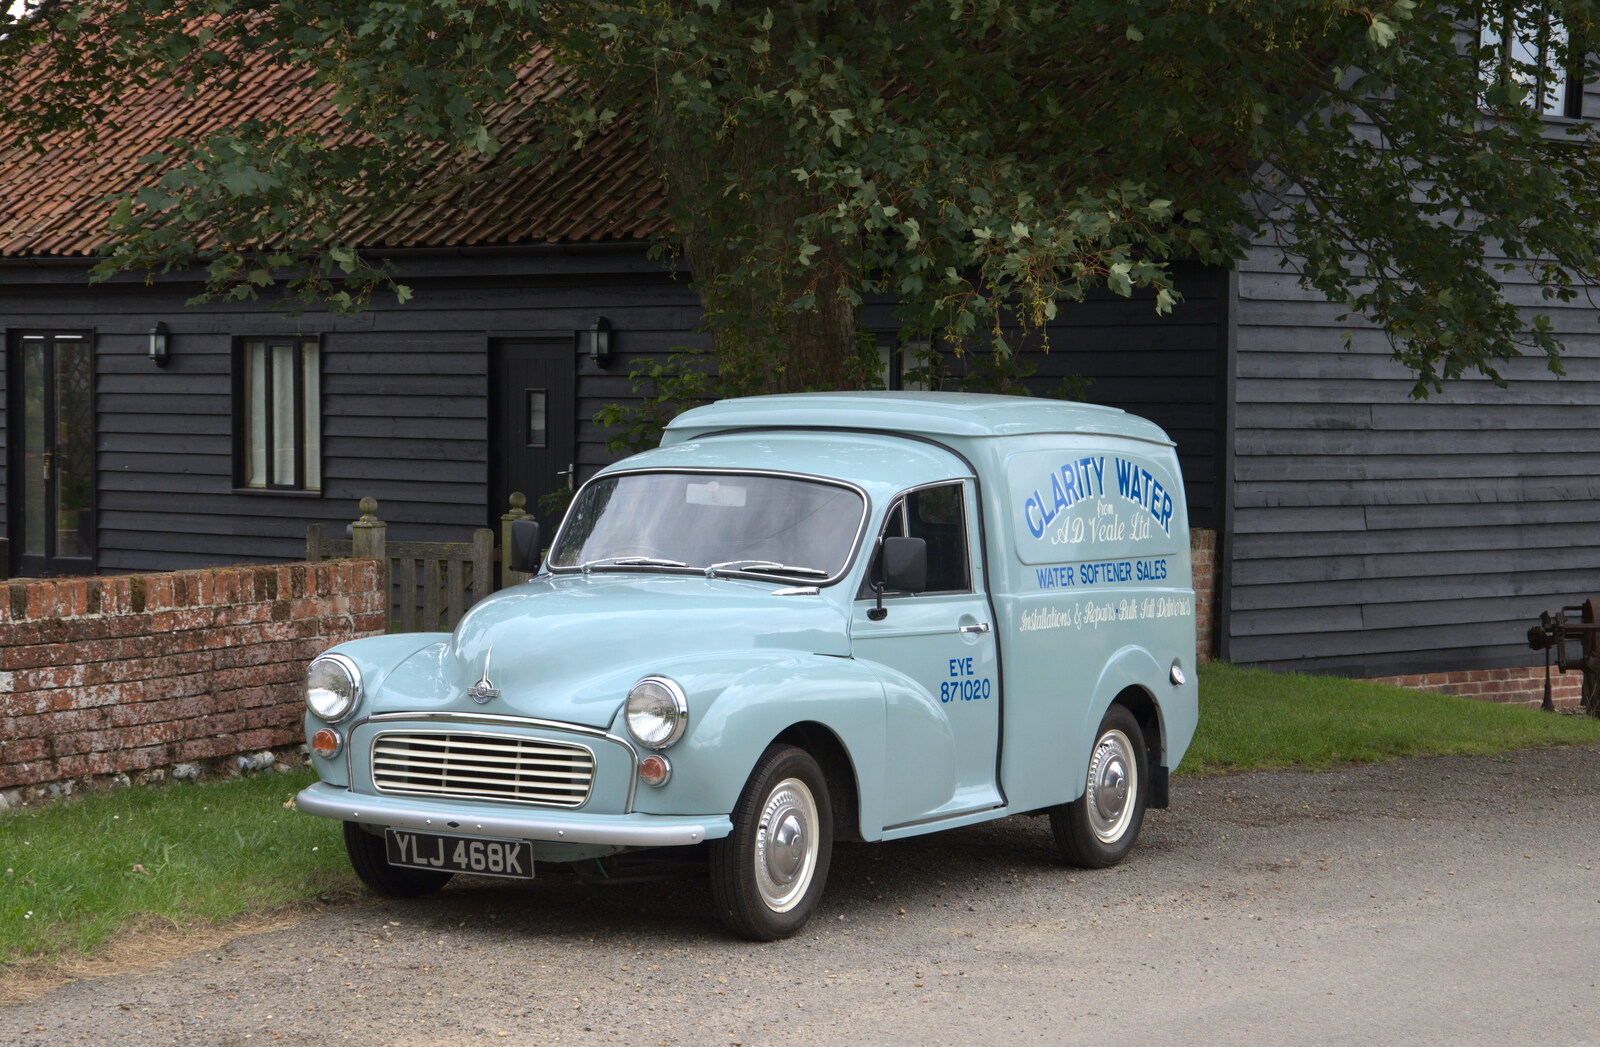 A lovely old Morris Minor van from A Picnic at Clive and Suzanne's, Braisworth, Suffolk - 11th July 2020